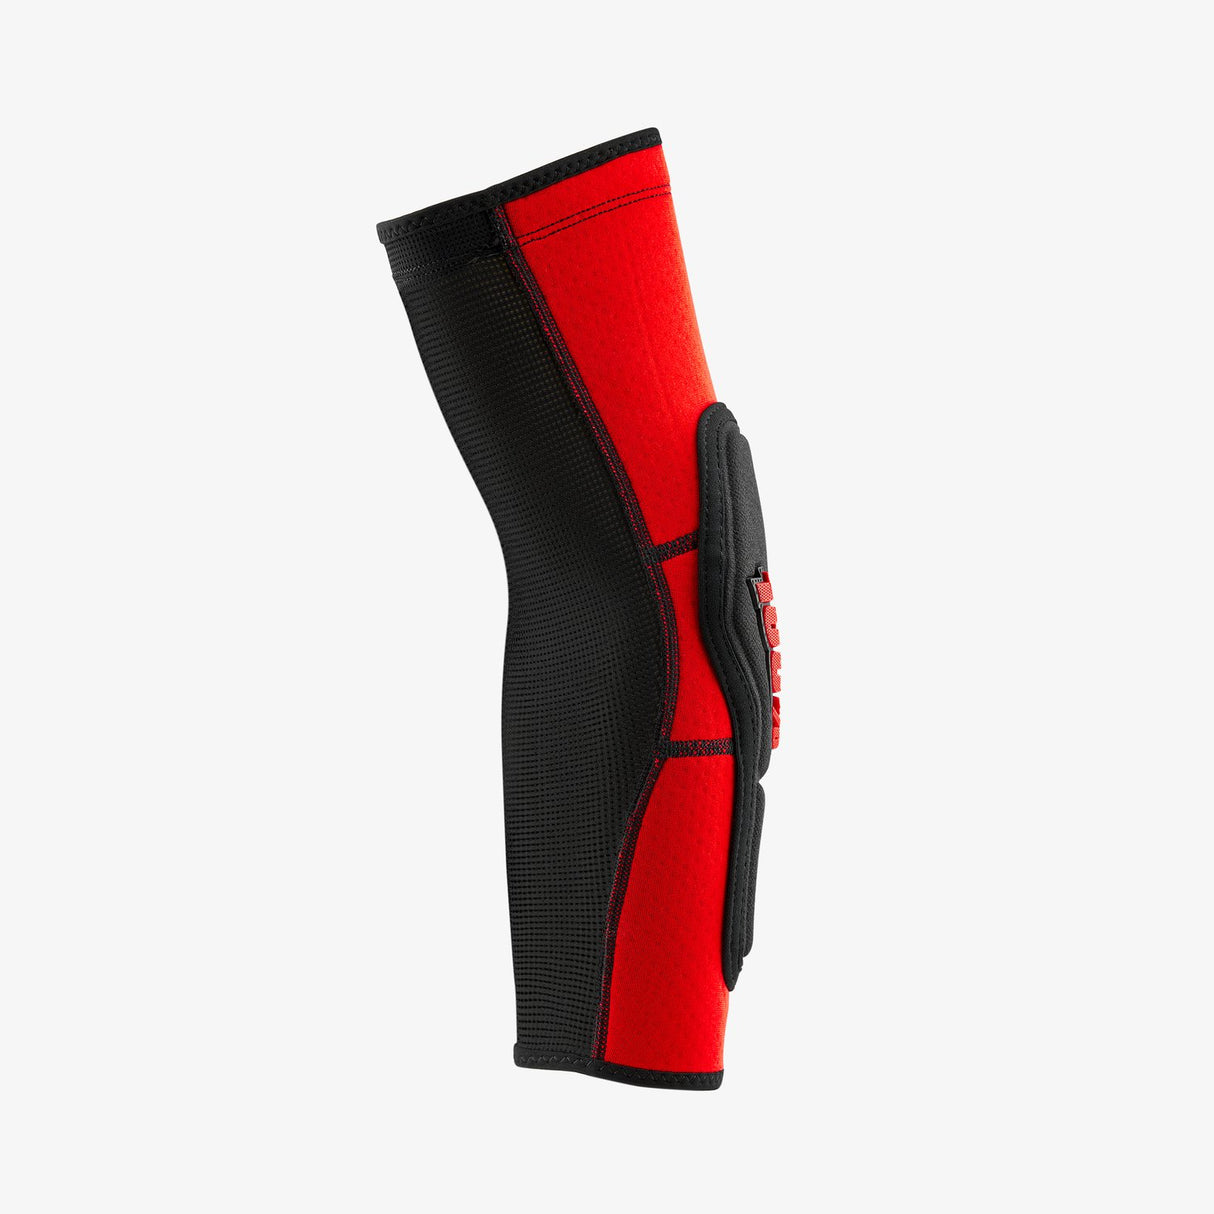 Ride 100% RIDECAMP Elbow Guards/Pads, Color: Red/Black- Size LG